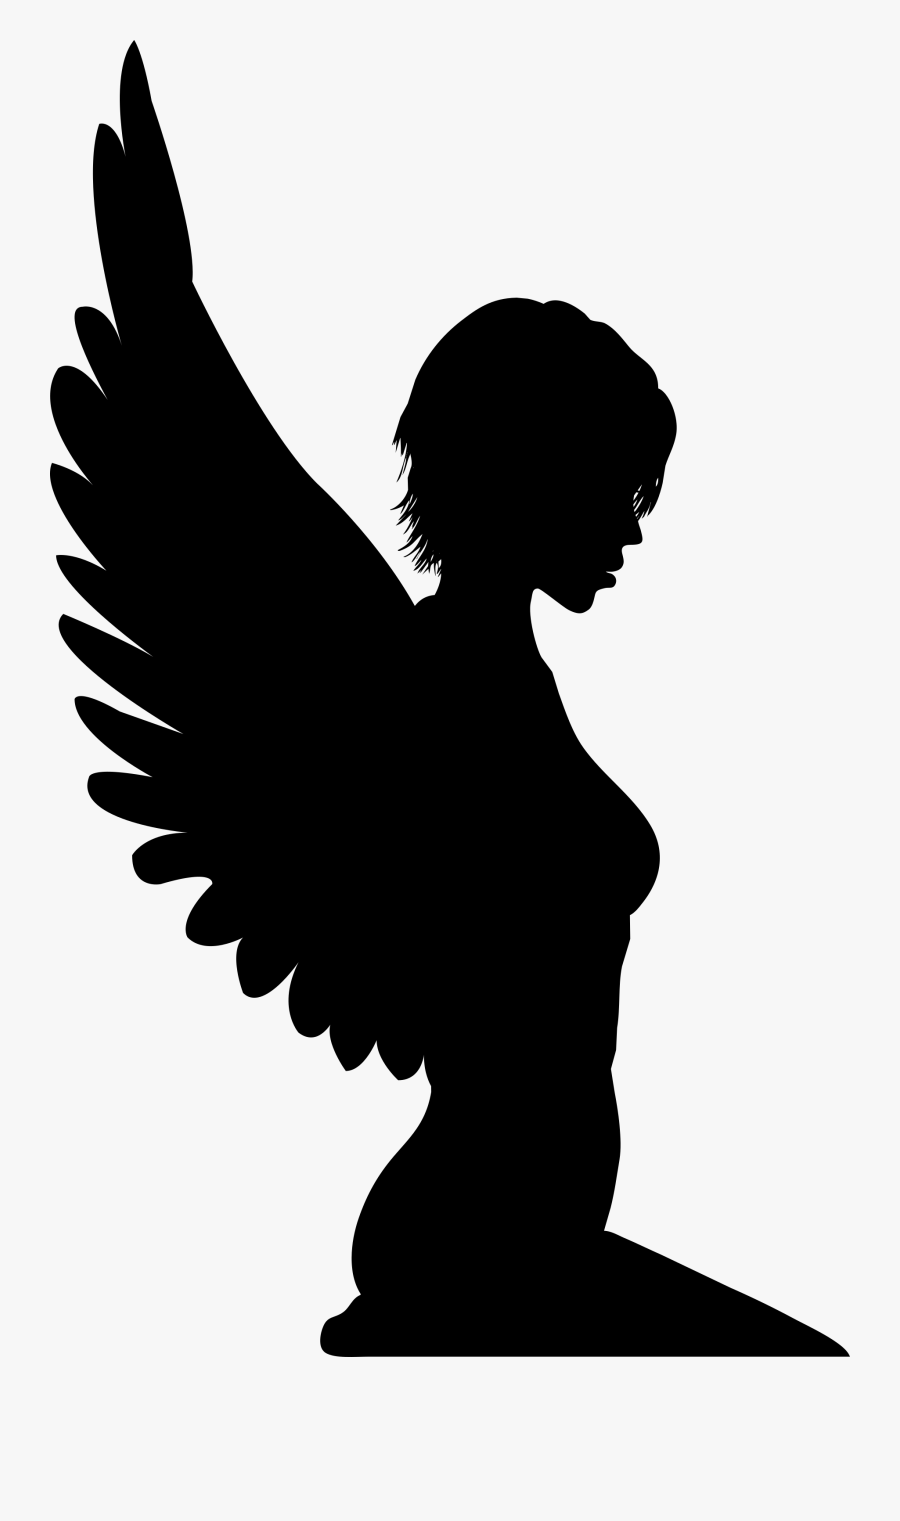 Woman With Wings Silhouette.